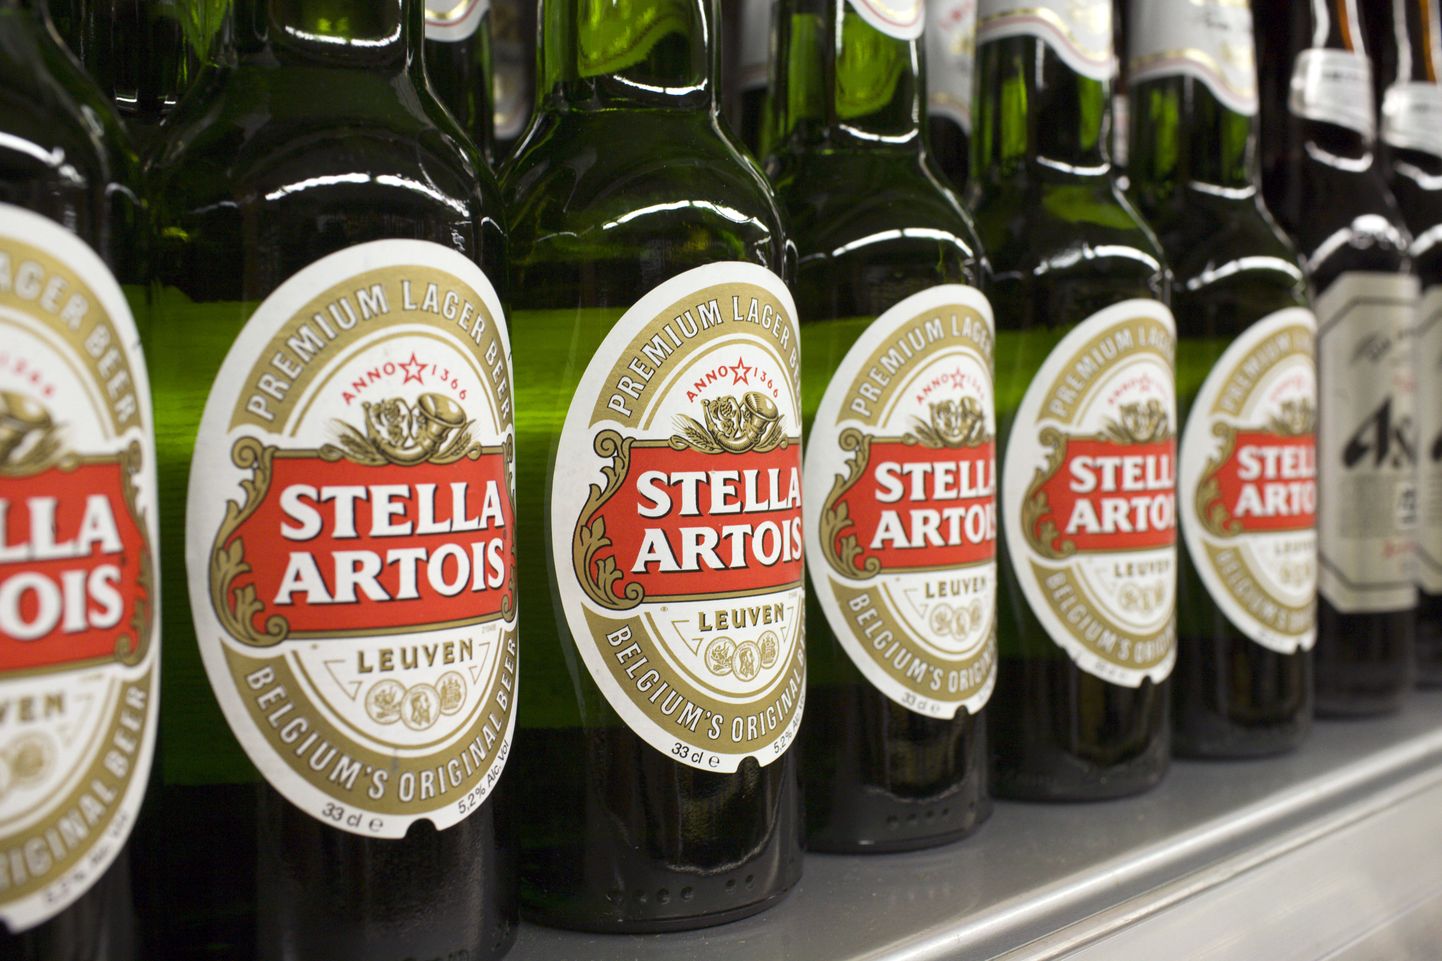 Bottles of Stella Artois beer, a brand of InBev, are displayed for sale at a store in Hong Kong's Sheung Wan district June 12, 2008. InBev NV has offered to buy Anheuser-Busch Cos Inc for $46.3 billion, as it seeks to create the world's largest brewer with the biggest ever takeover of an alcoholic drinks company. InBev, whose brands include Stella Artois and Beck's, said on Wednesday it is offering $65 per share for Anheuser, which dominates the U.S. beer market with a 48.5 percent share.   REUTERS/Victor Fraile (CHINA)